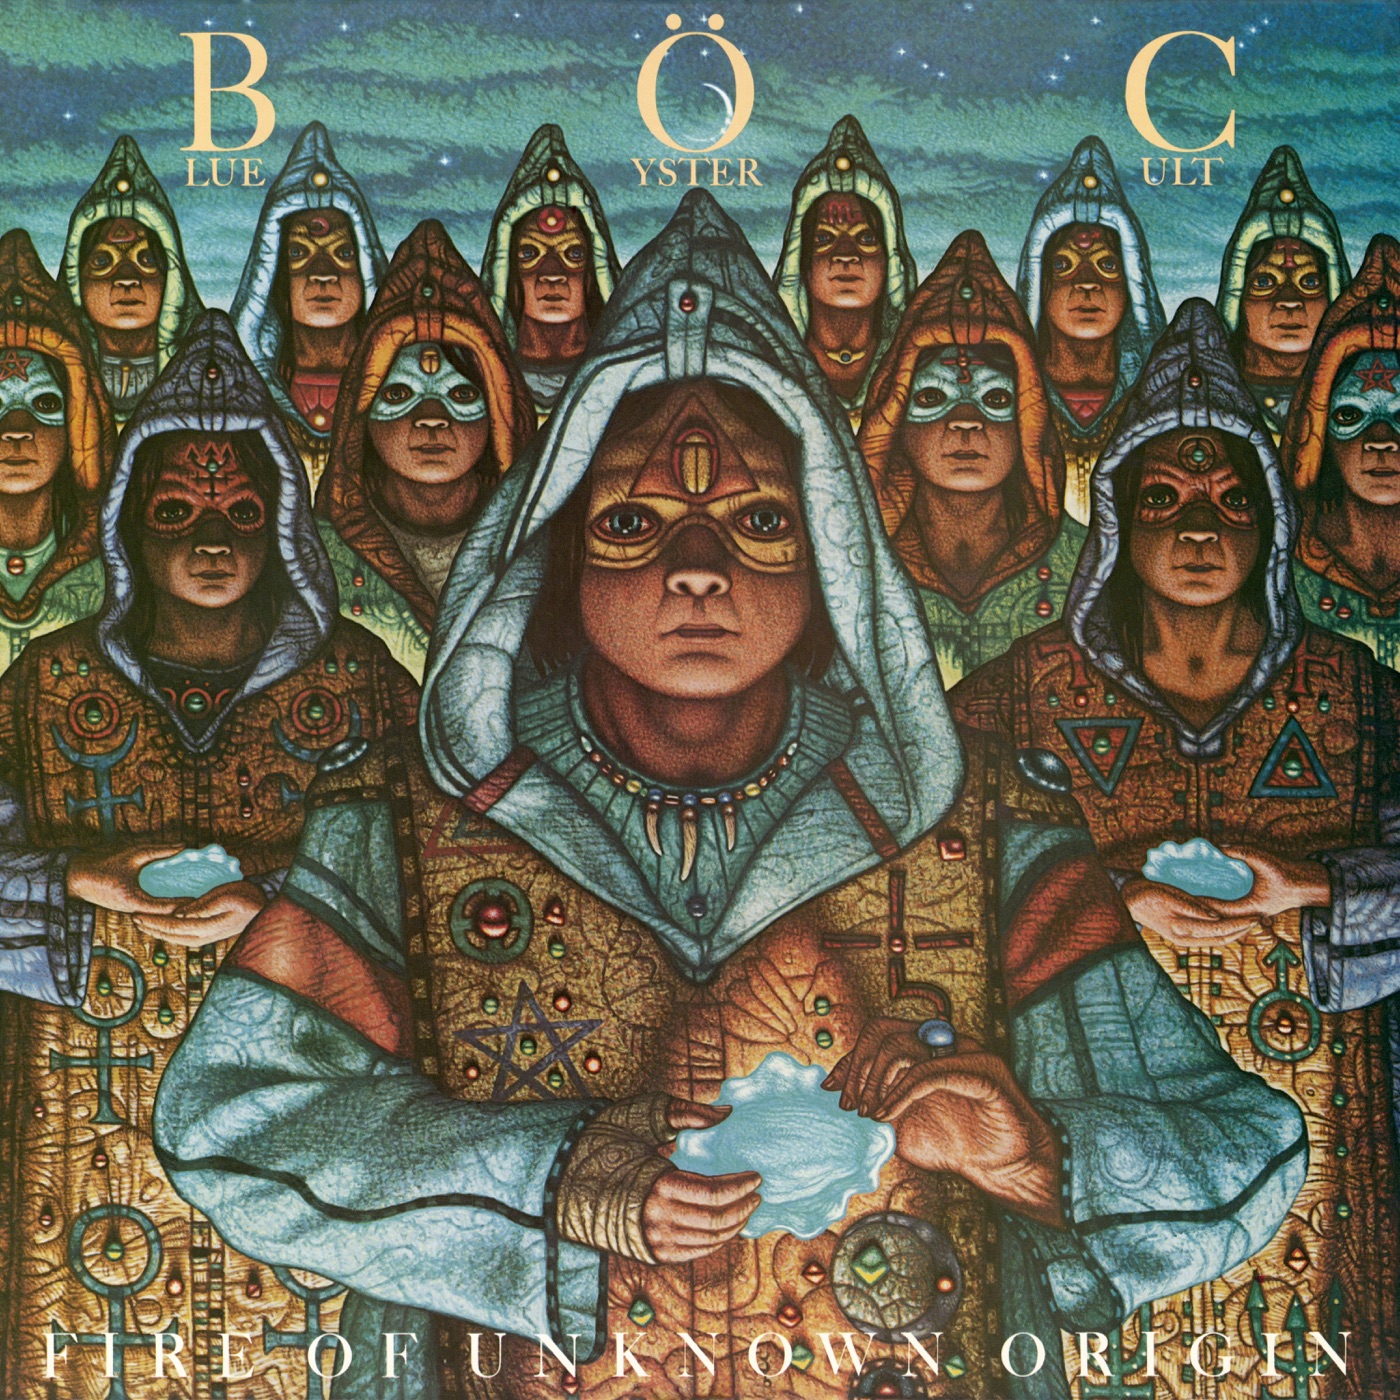 Fire of Unknown Origin by Blue Öyster Cult